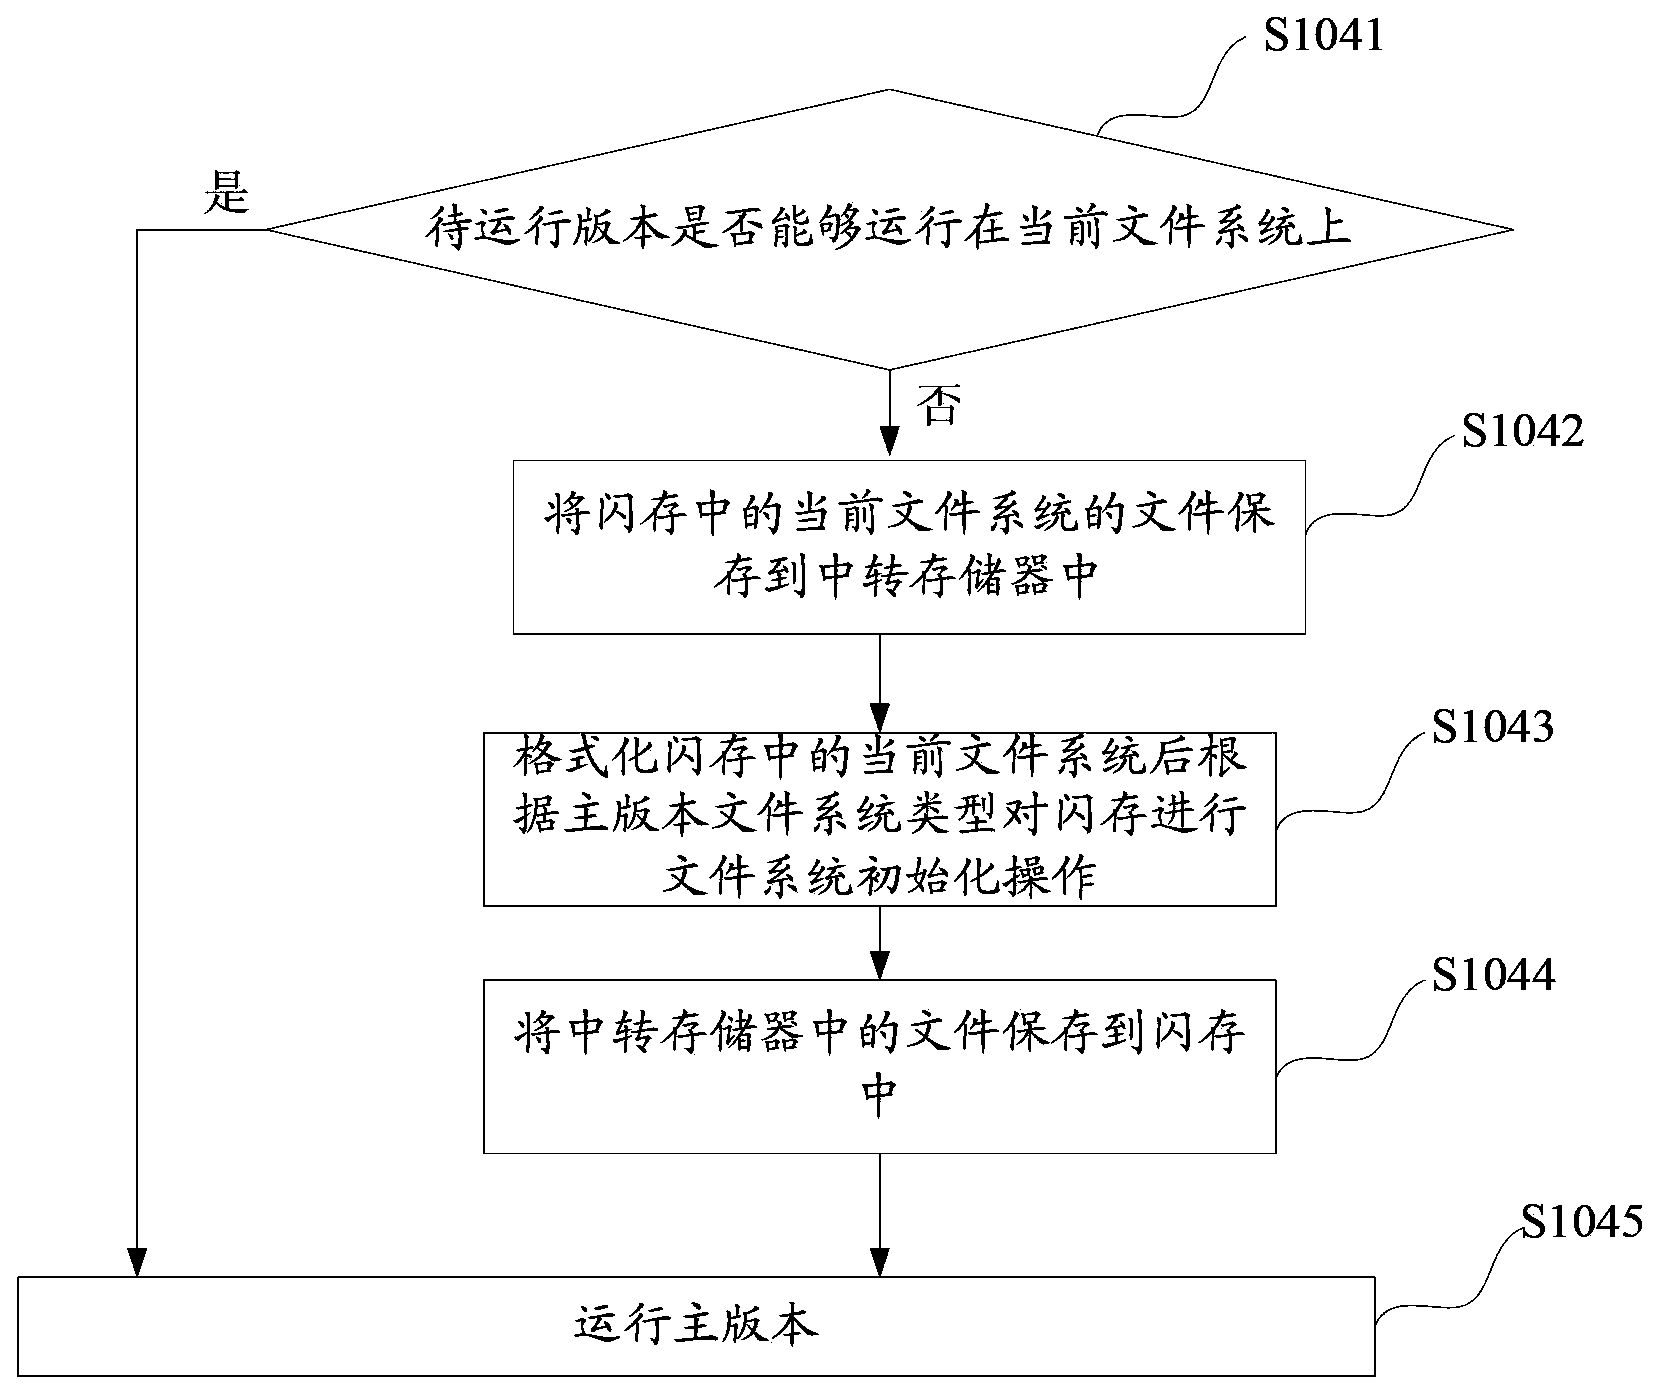 Cross-file-system version on-line upgrading method and device